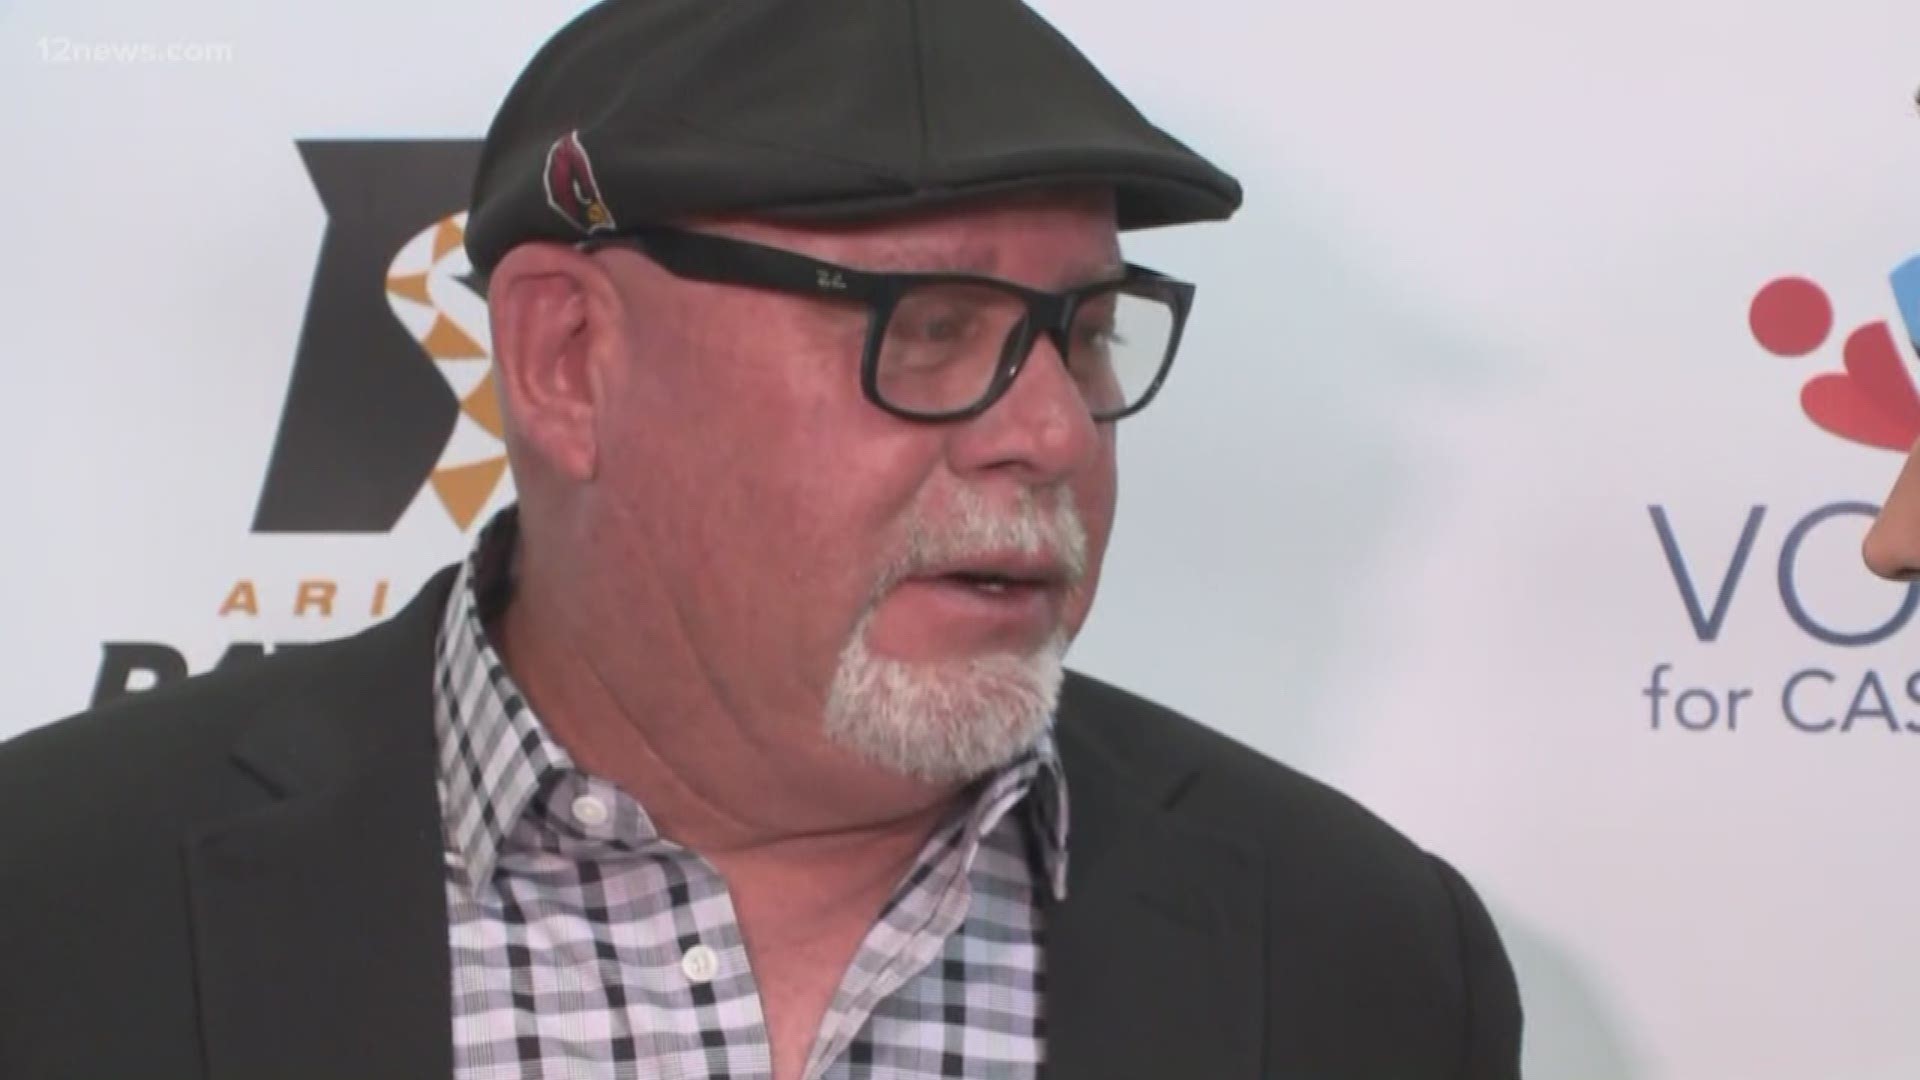 The Arians are hosting the Arians Family Foundation gala. The former Arizona Cardinals coach is adjusting to life after football. While some suggest the Cards should snap up Dez Bryant, Arians has his doubts.